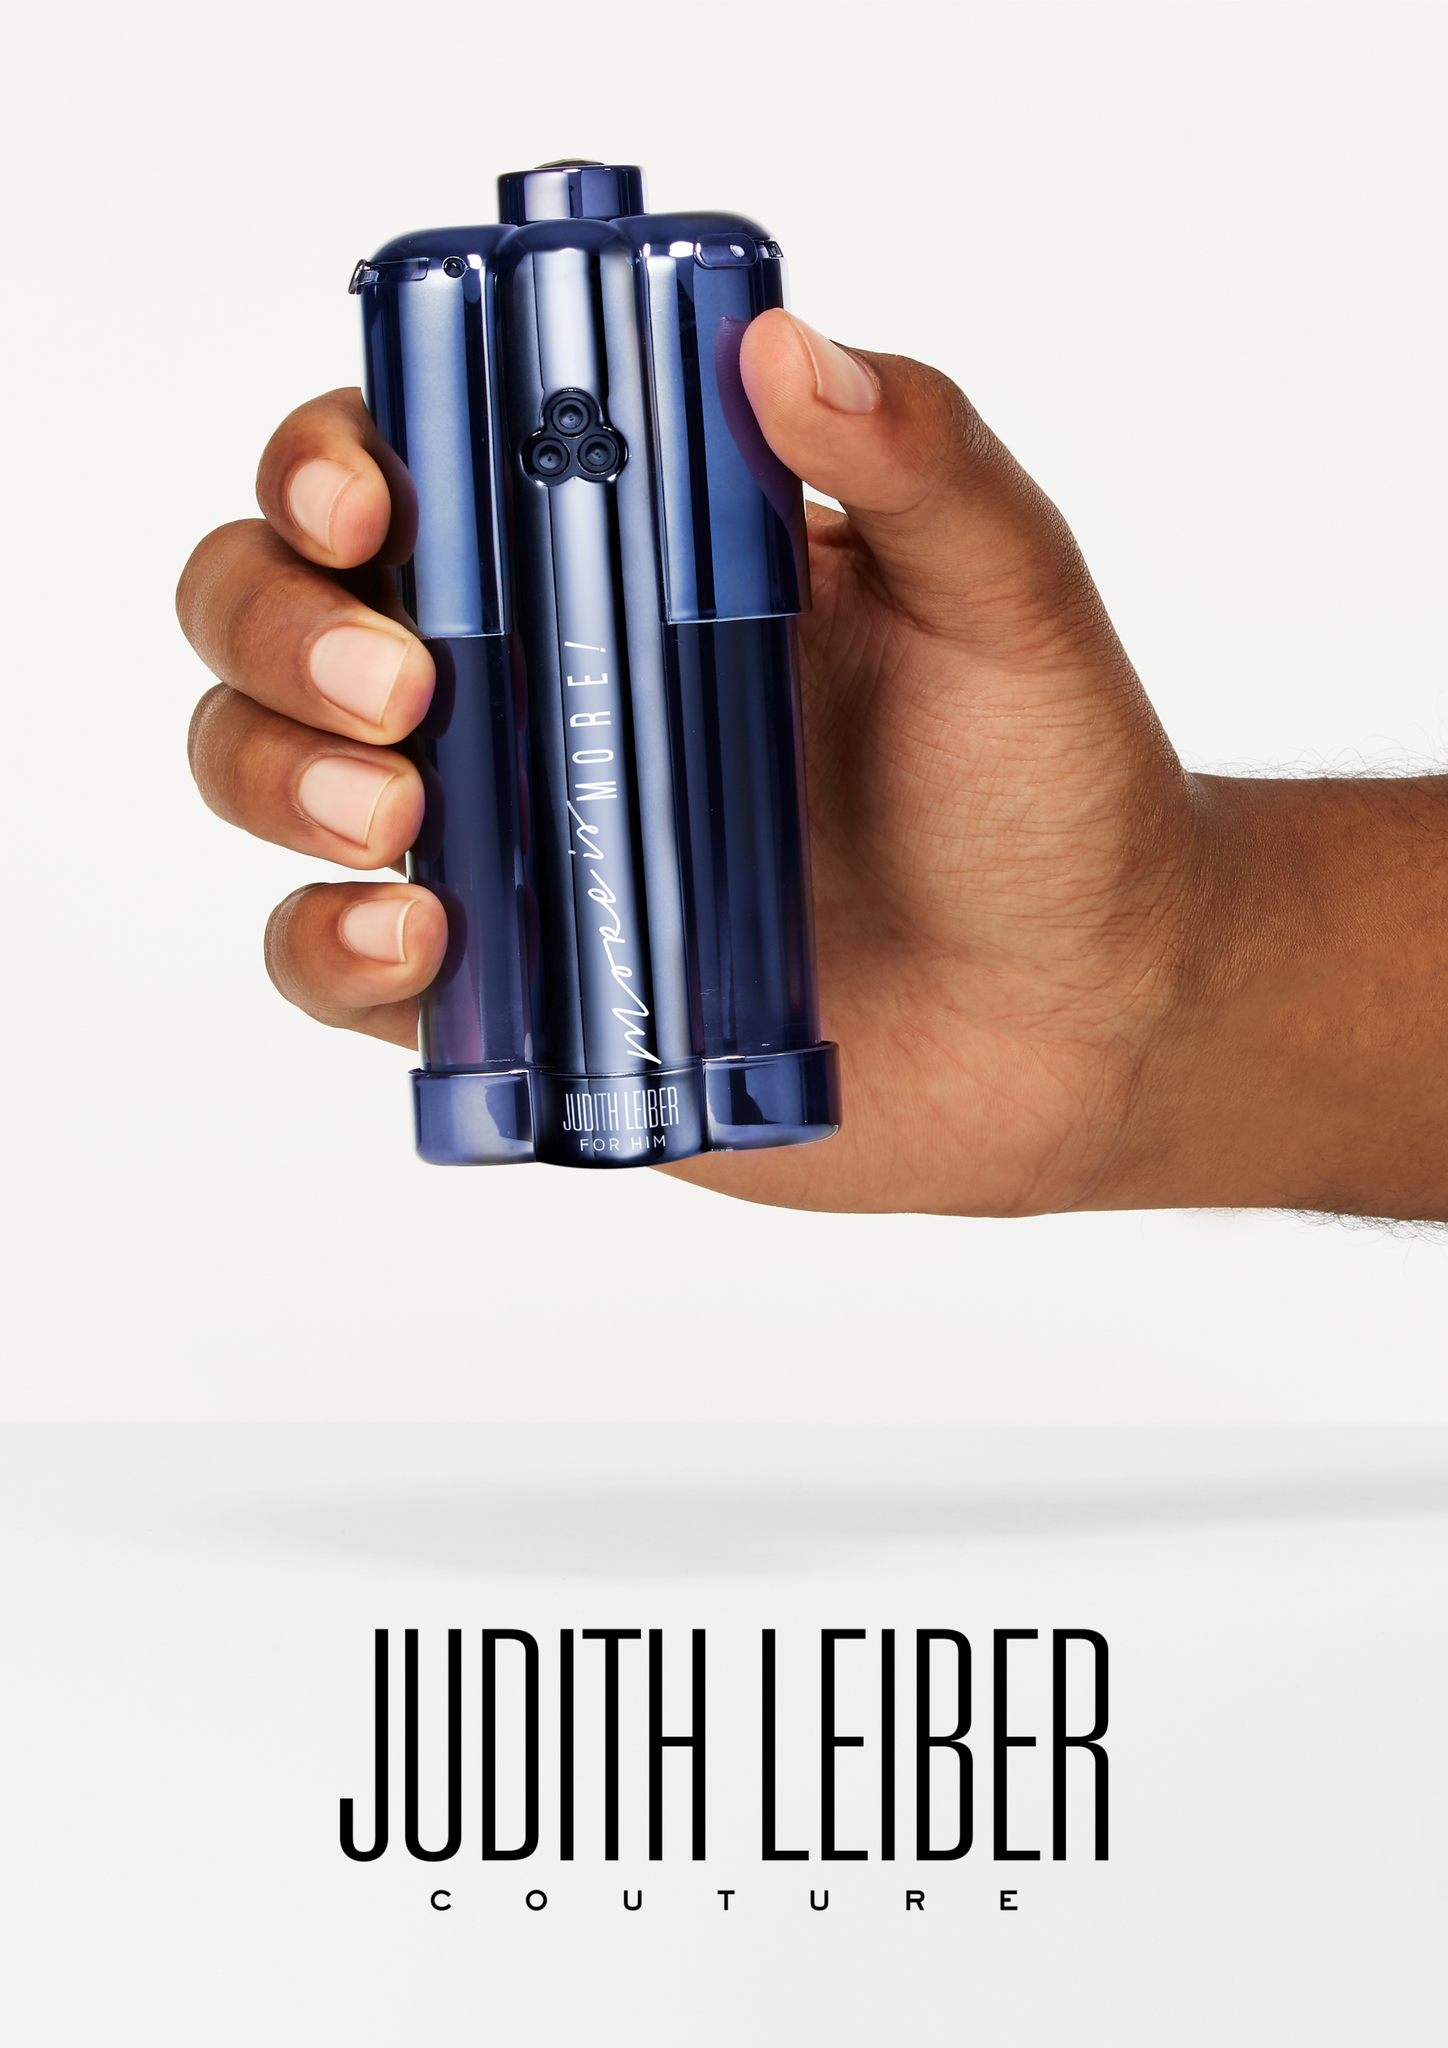 Judith Leiber for him - More is more!